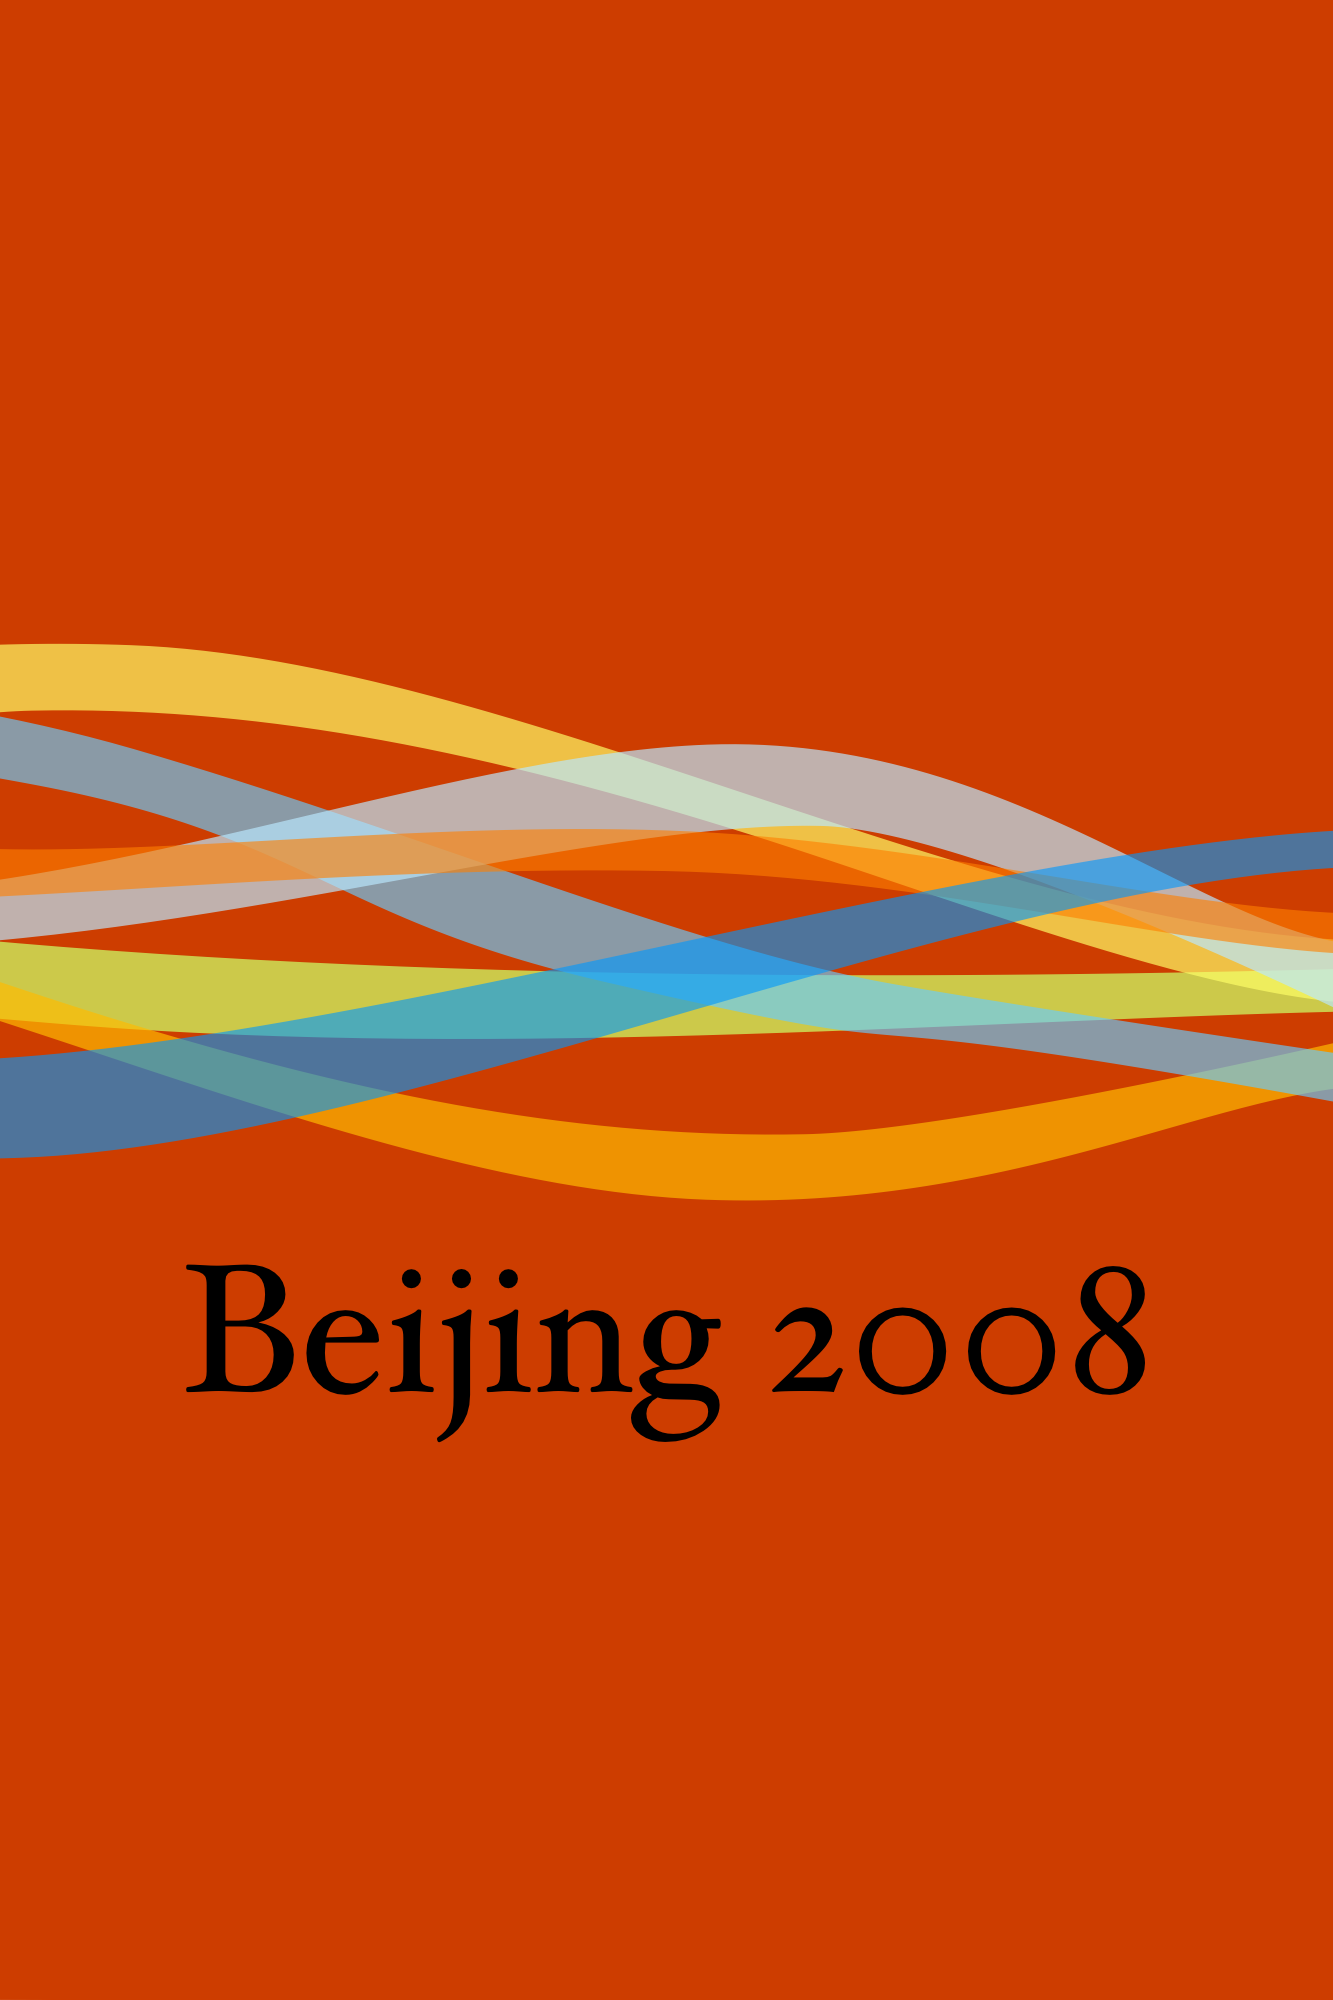 This is just a quick wallpaper I whipped up for the 2008 Beijing Olympics.